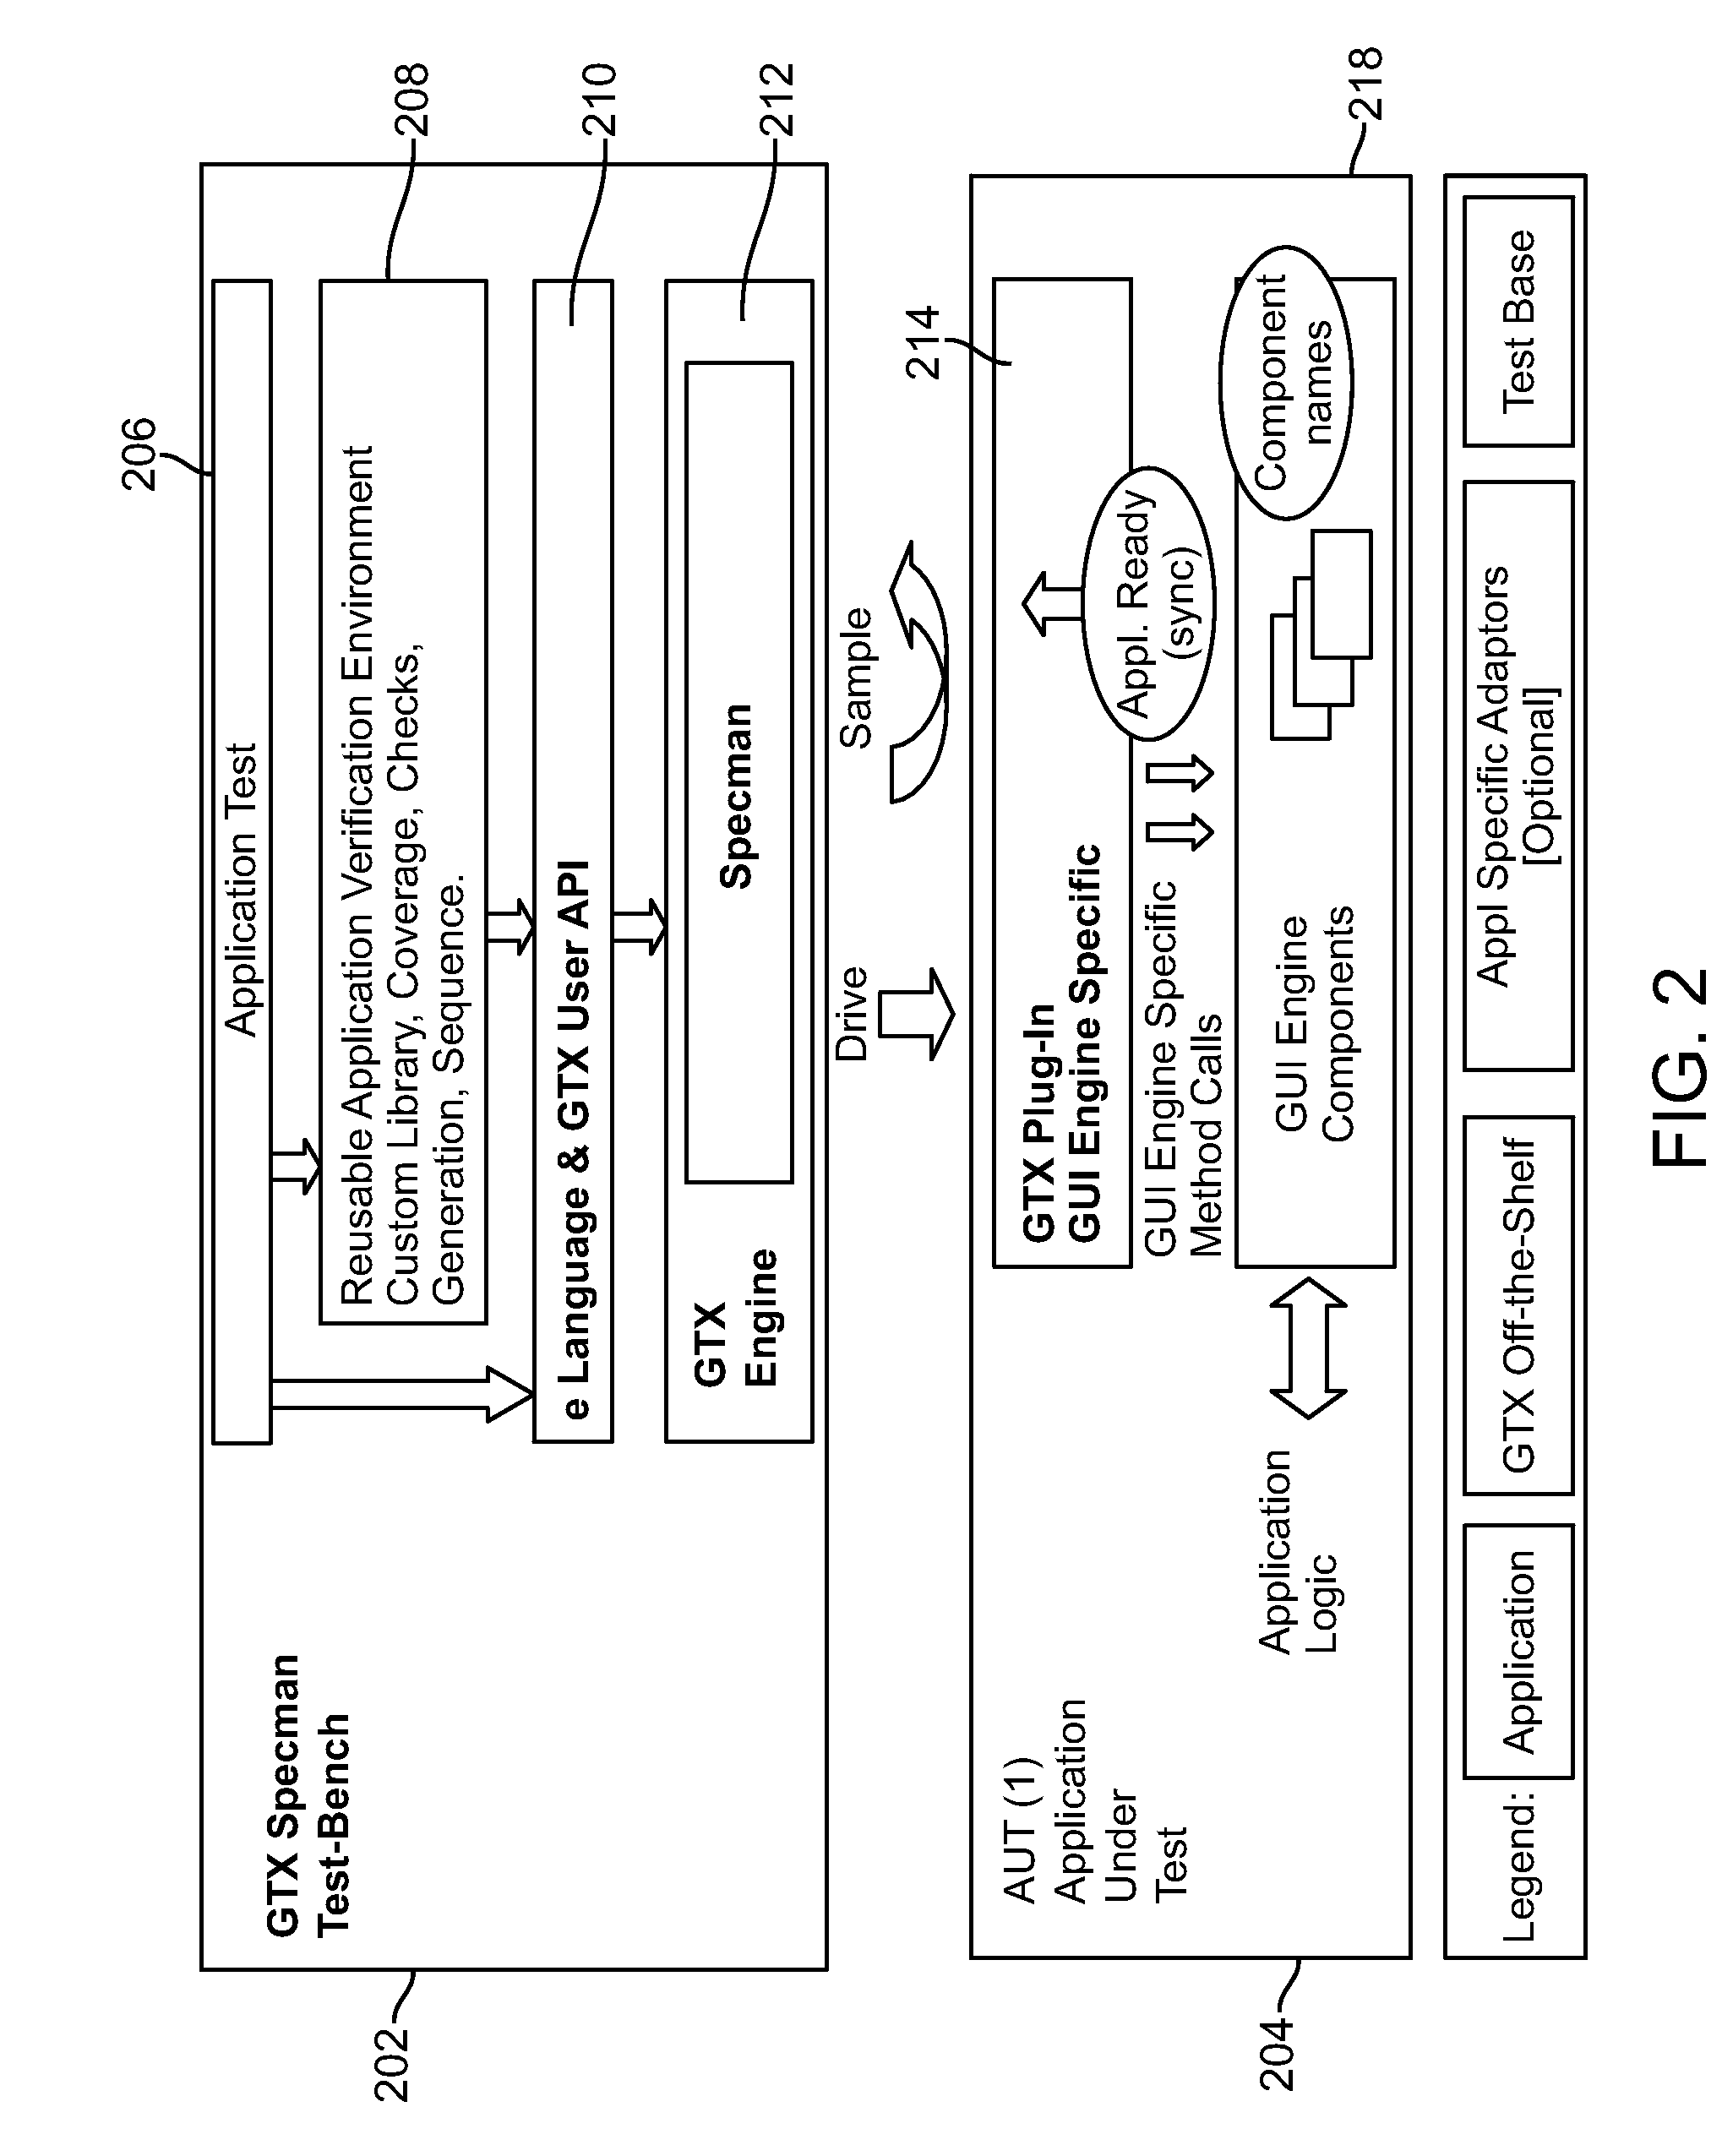 Method and system for testing and analyzing user interfaces